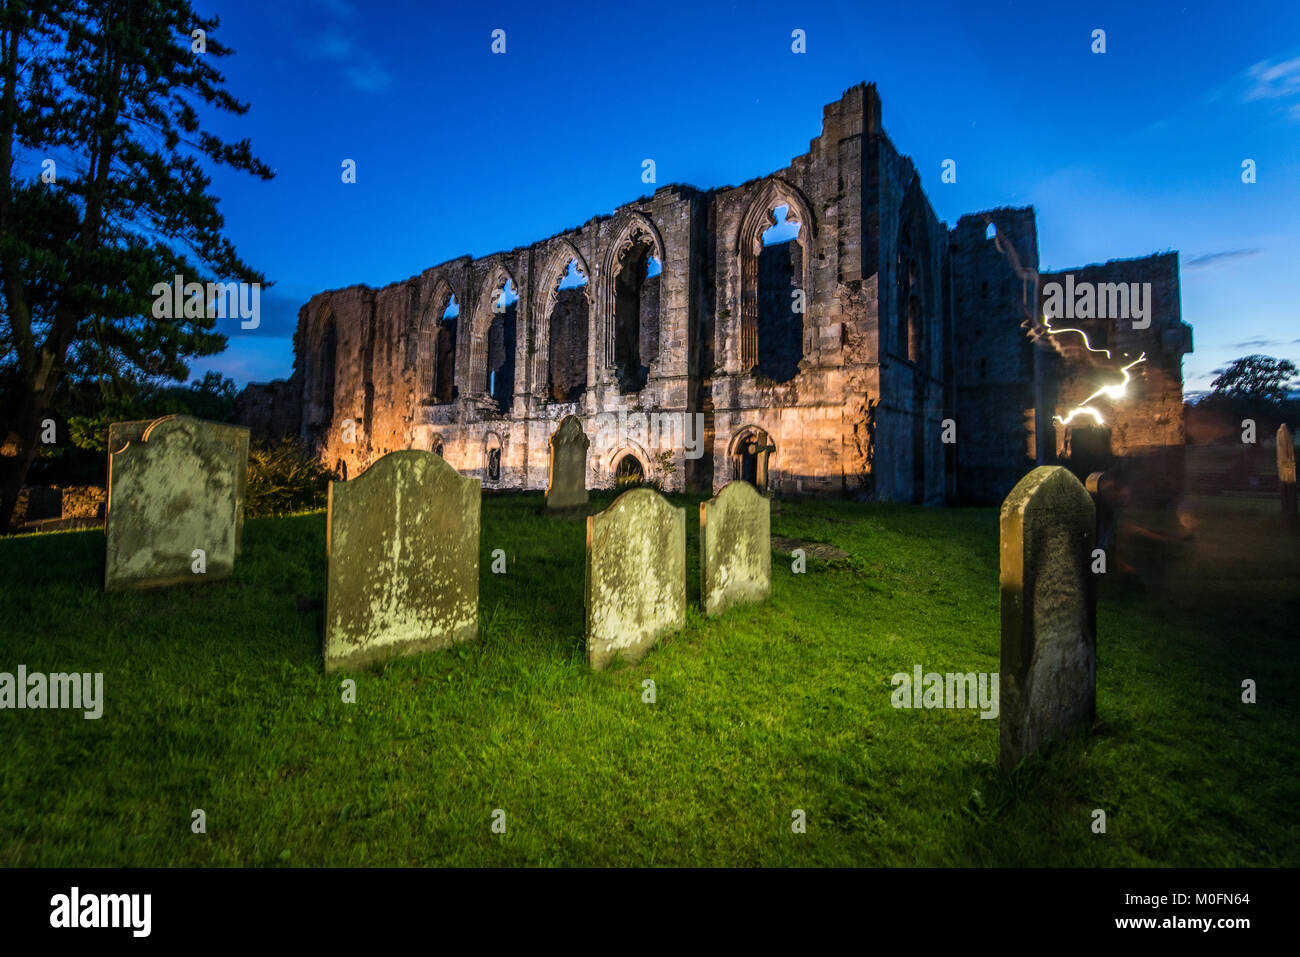 Artificial light used to illuminate graveyard in front of Easby Abbey, Yorkshire, UK Stock Photo